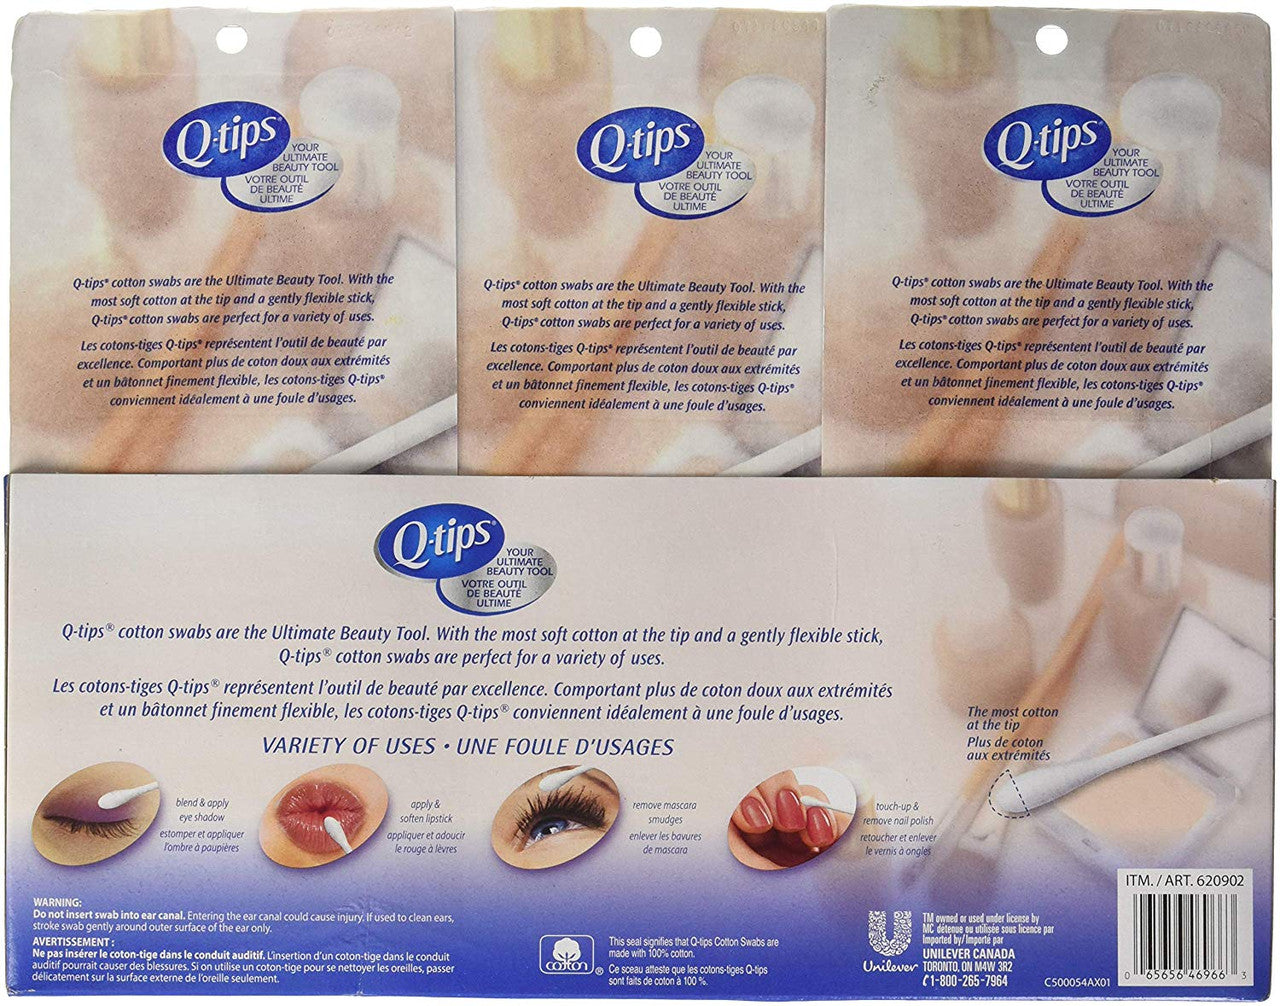 Q-tips Cotton Swabs, 625 ct (3pk) {Imported from Canada}